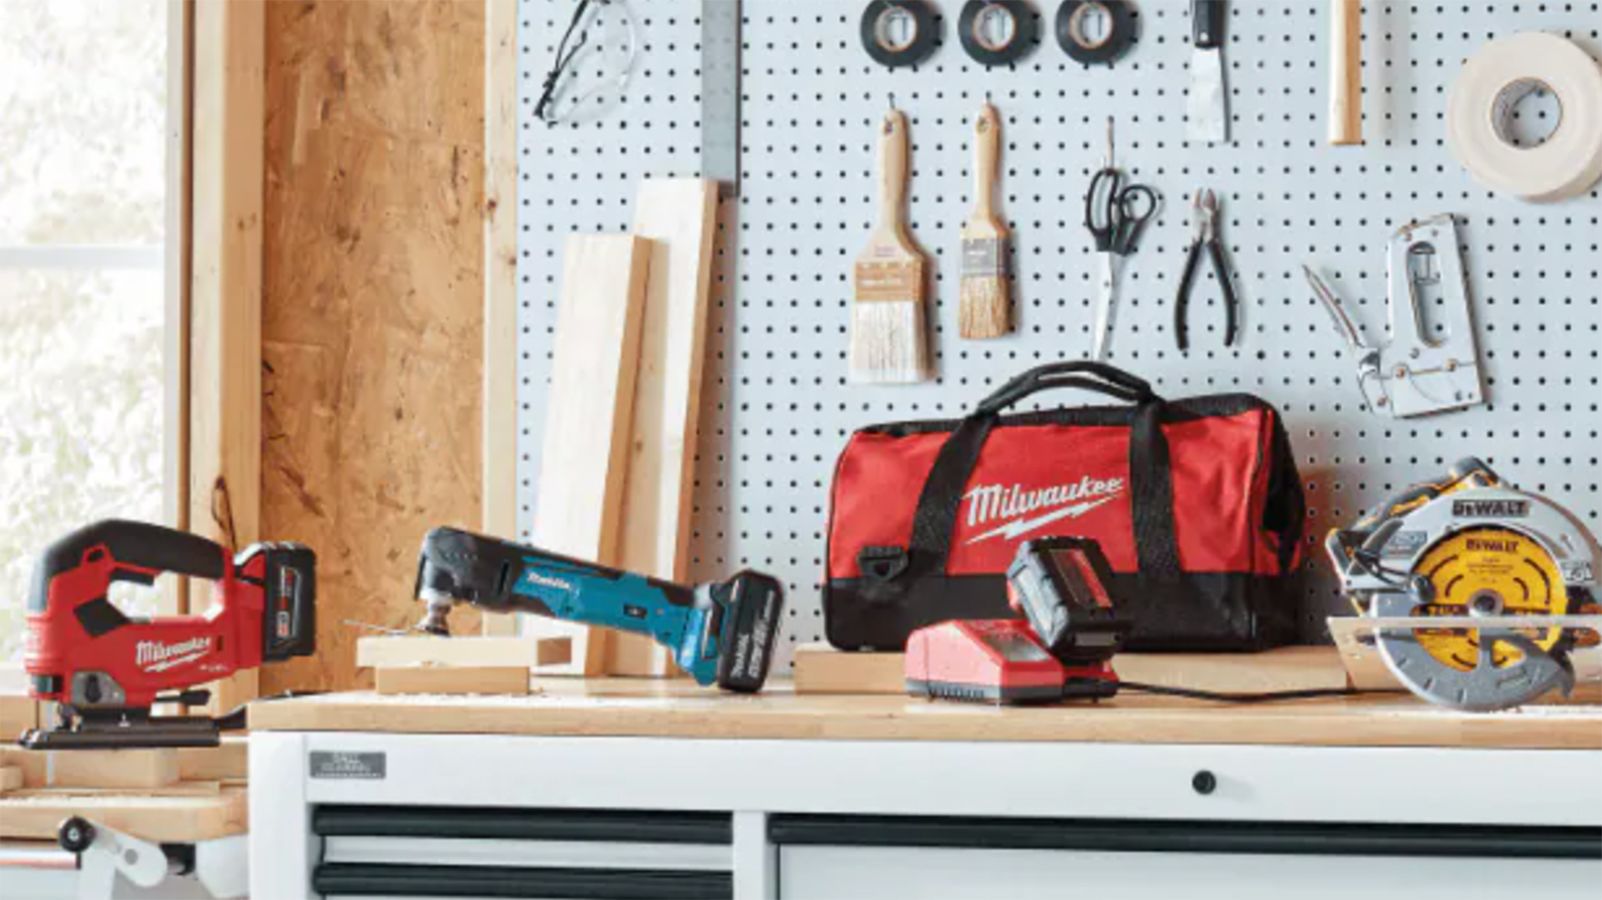 Home Depot Black Friday deals 2021: Tools, appliances, holiday decorations and more